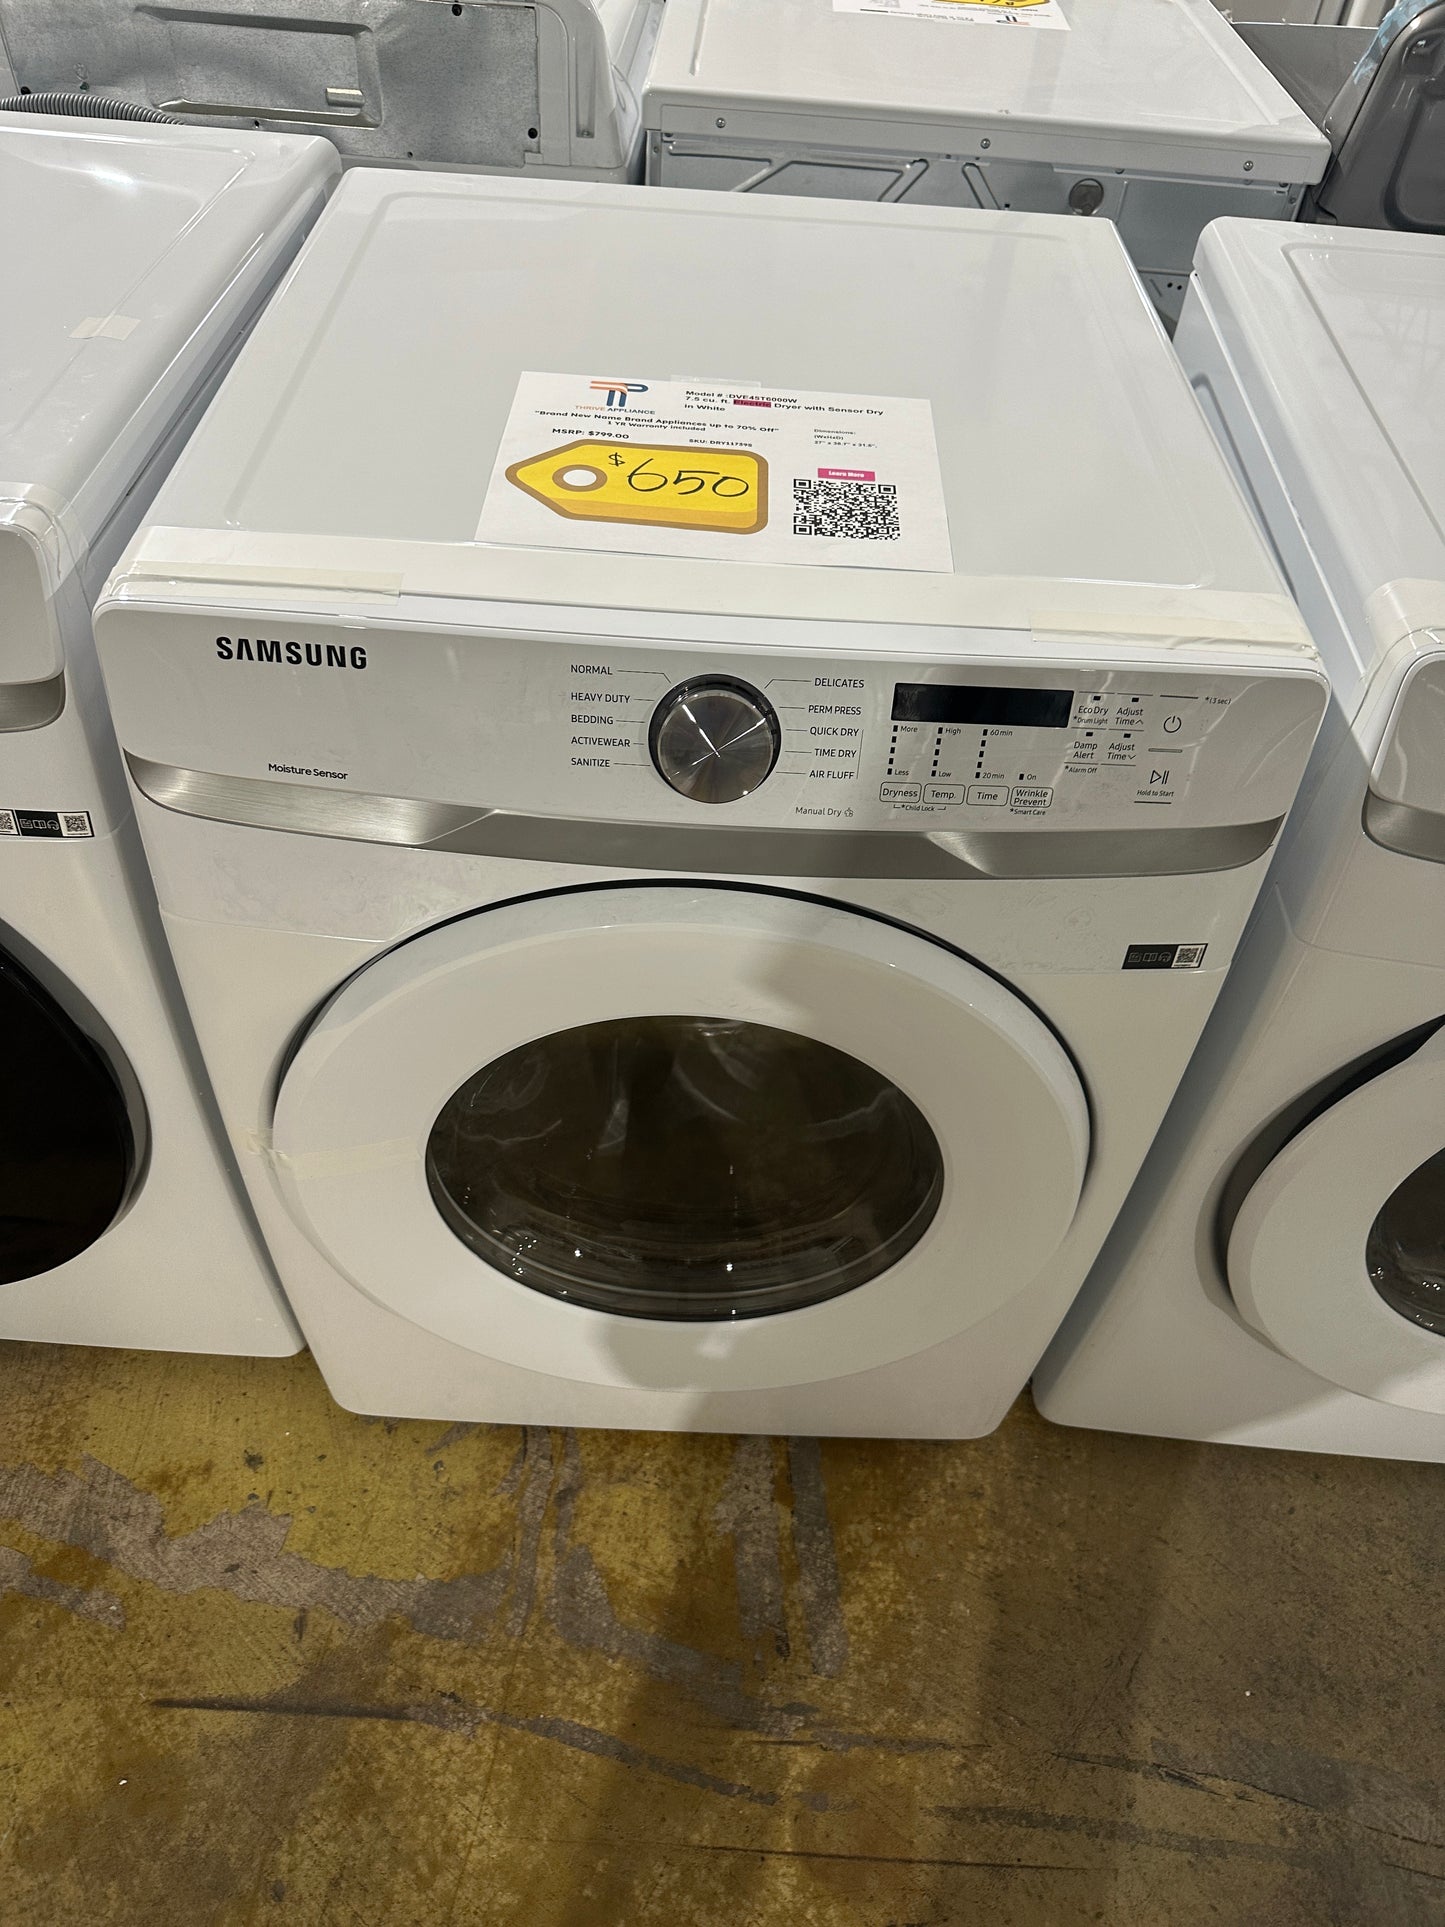 STACKABLE ELECTRIC DRYER WITH SENSOR DRY - DRY11739S DVE45T6000W